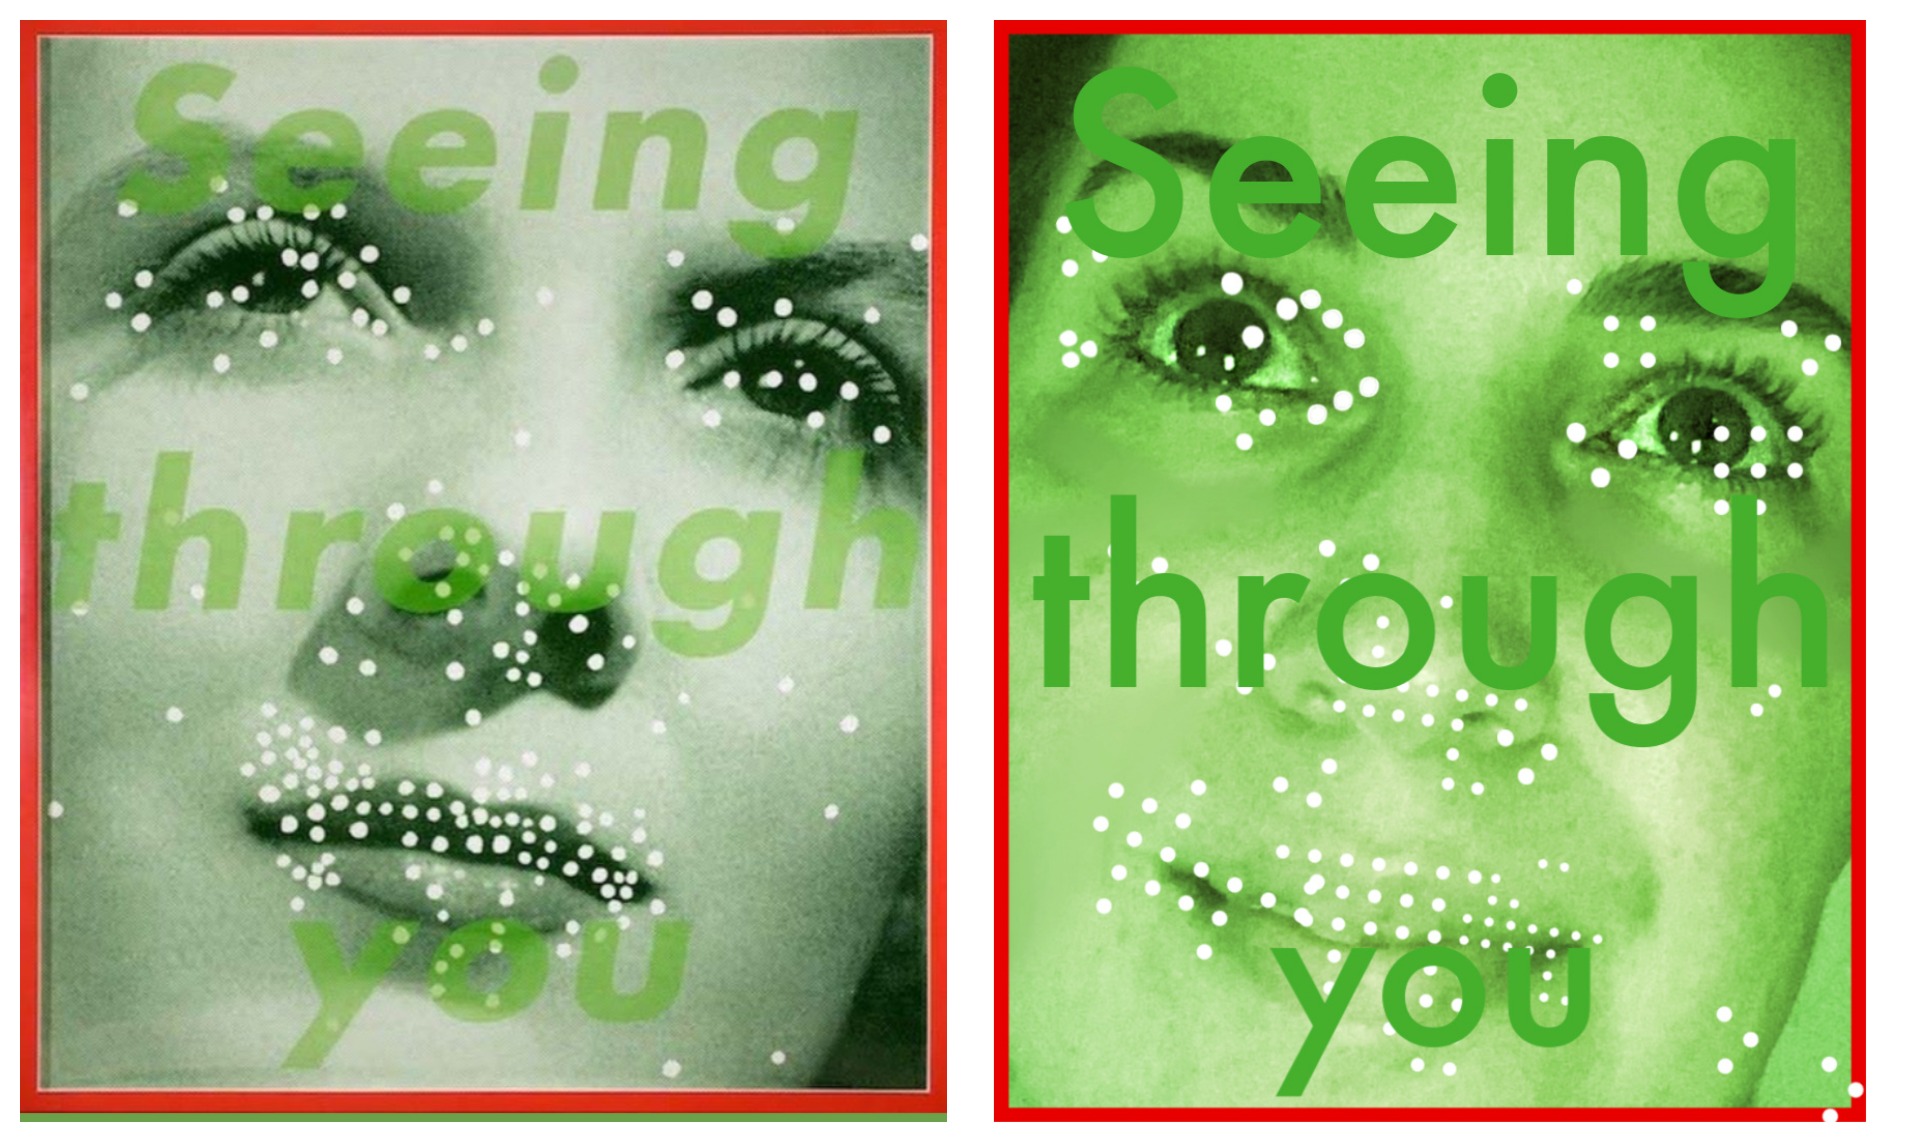 Barbara Kruger's seeing through you artwork on the left is compared to a recreation on the right. this is part of the Between art and quarantine challenge. 